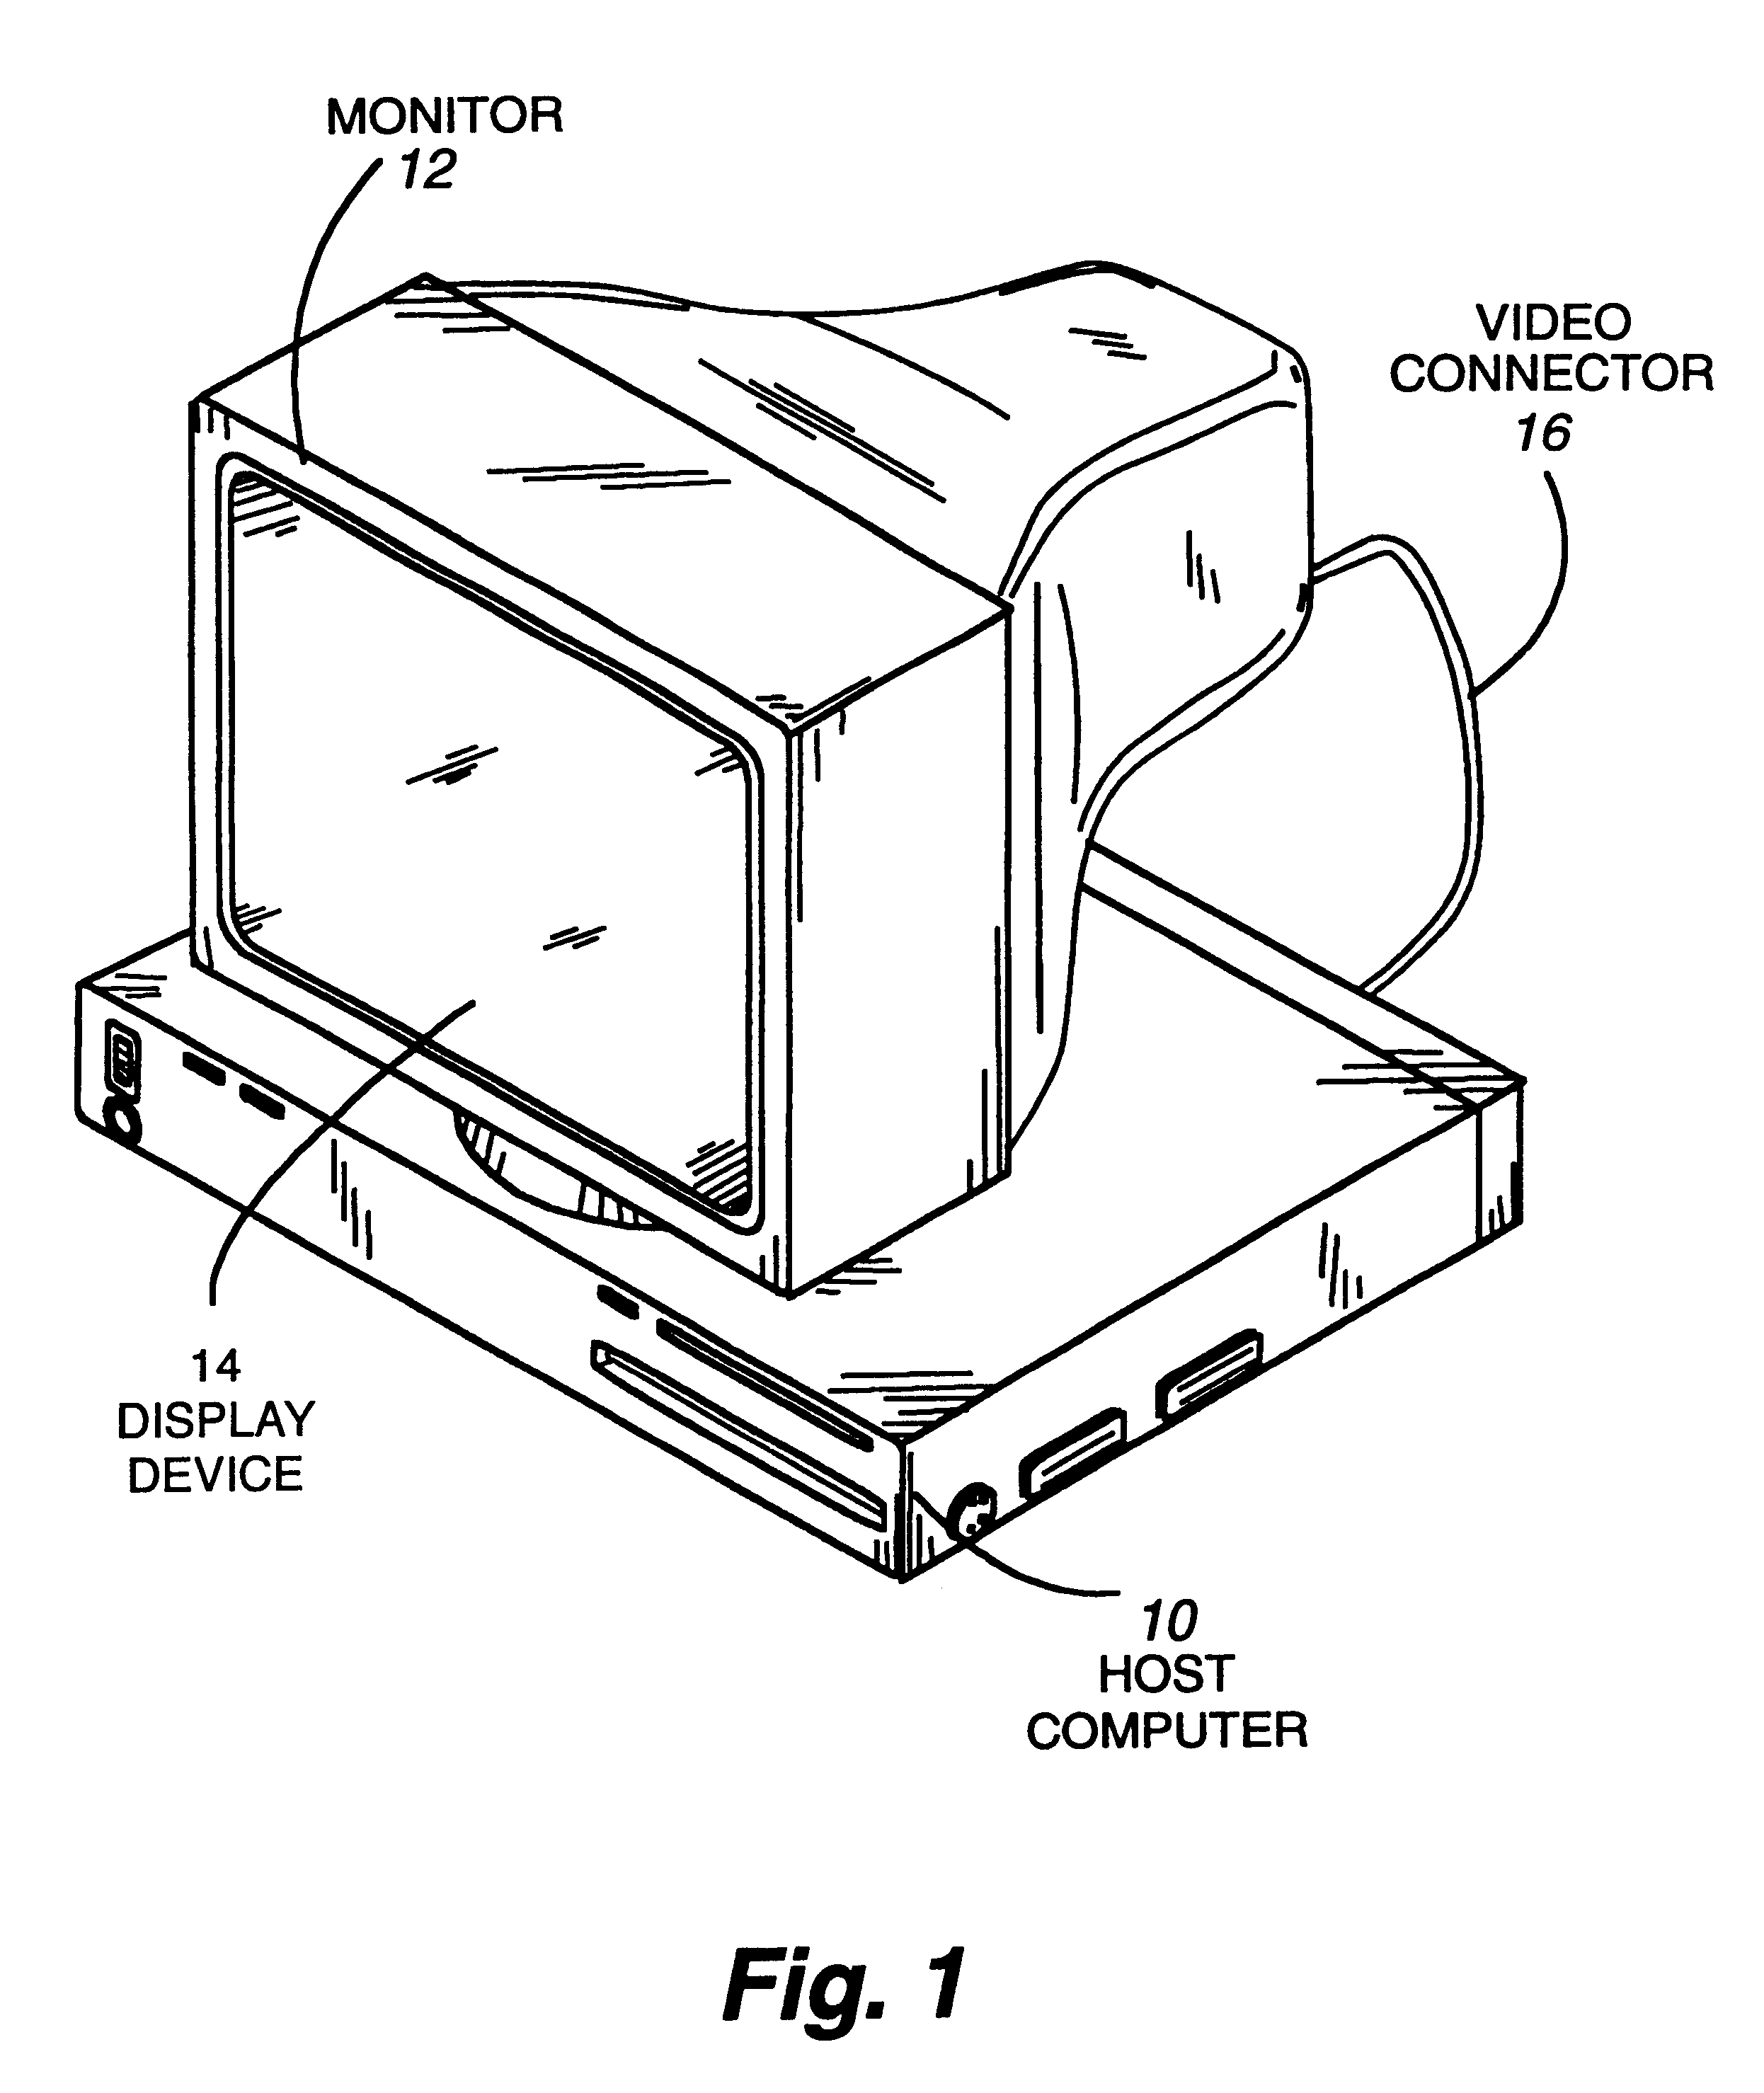 Alignment of cathode ray tube displays using a video graphics controller